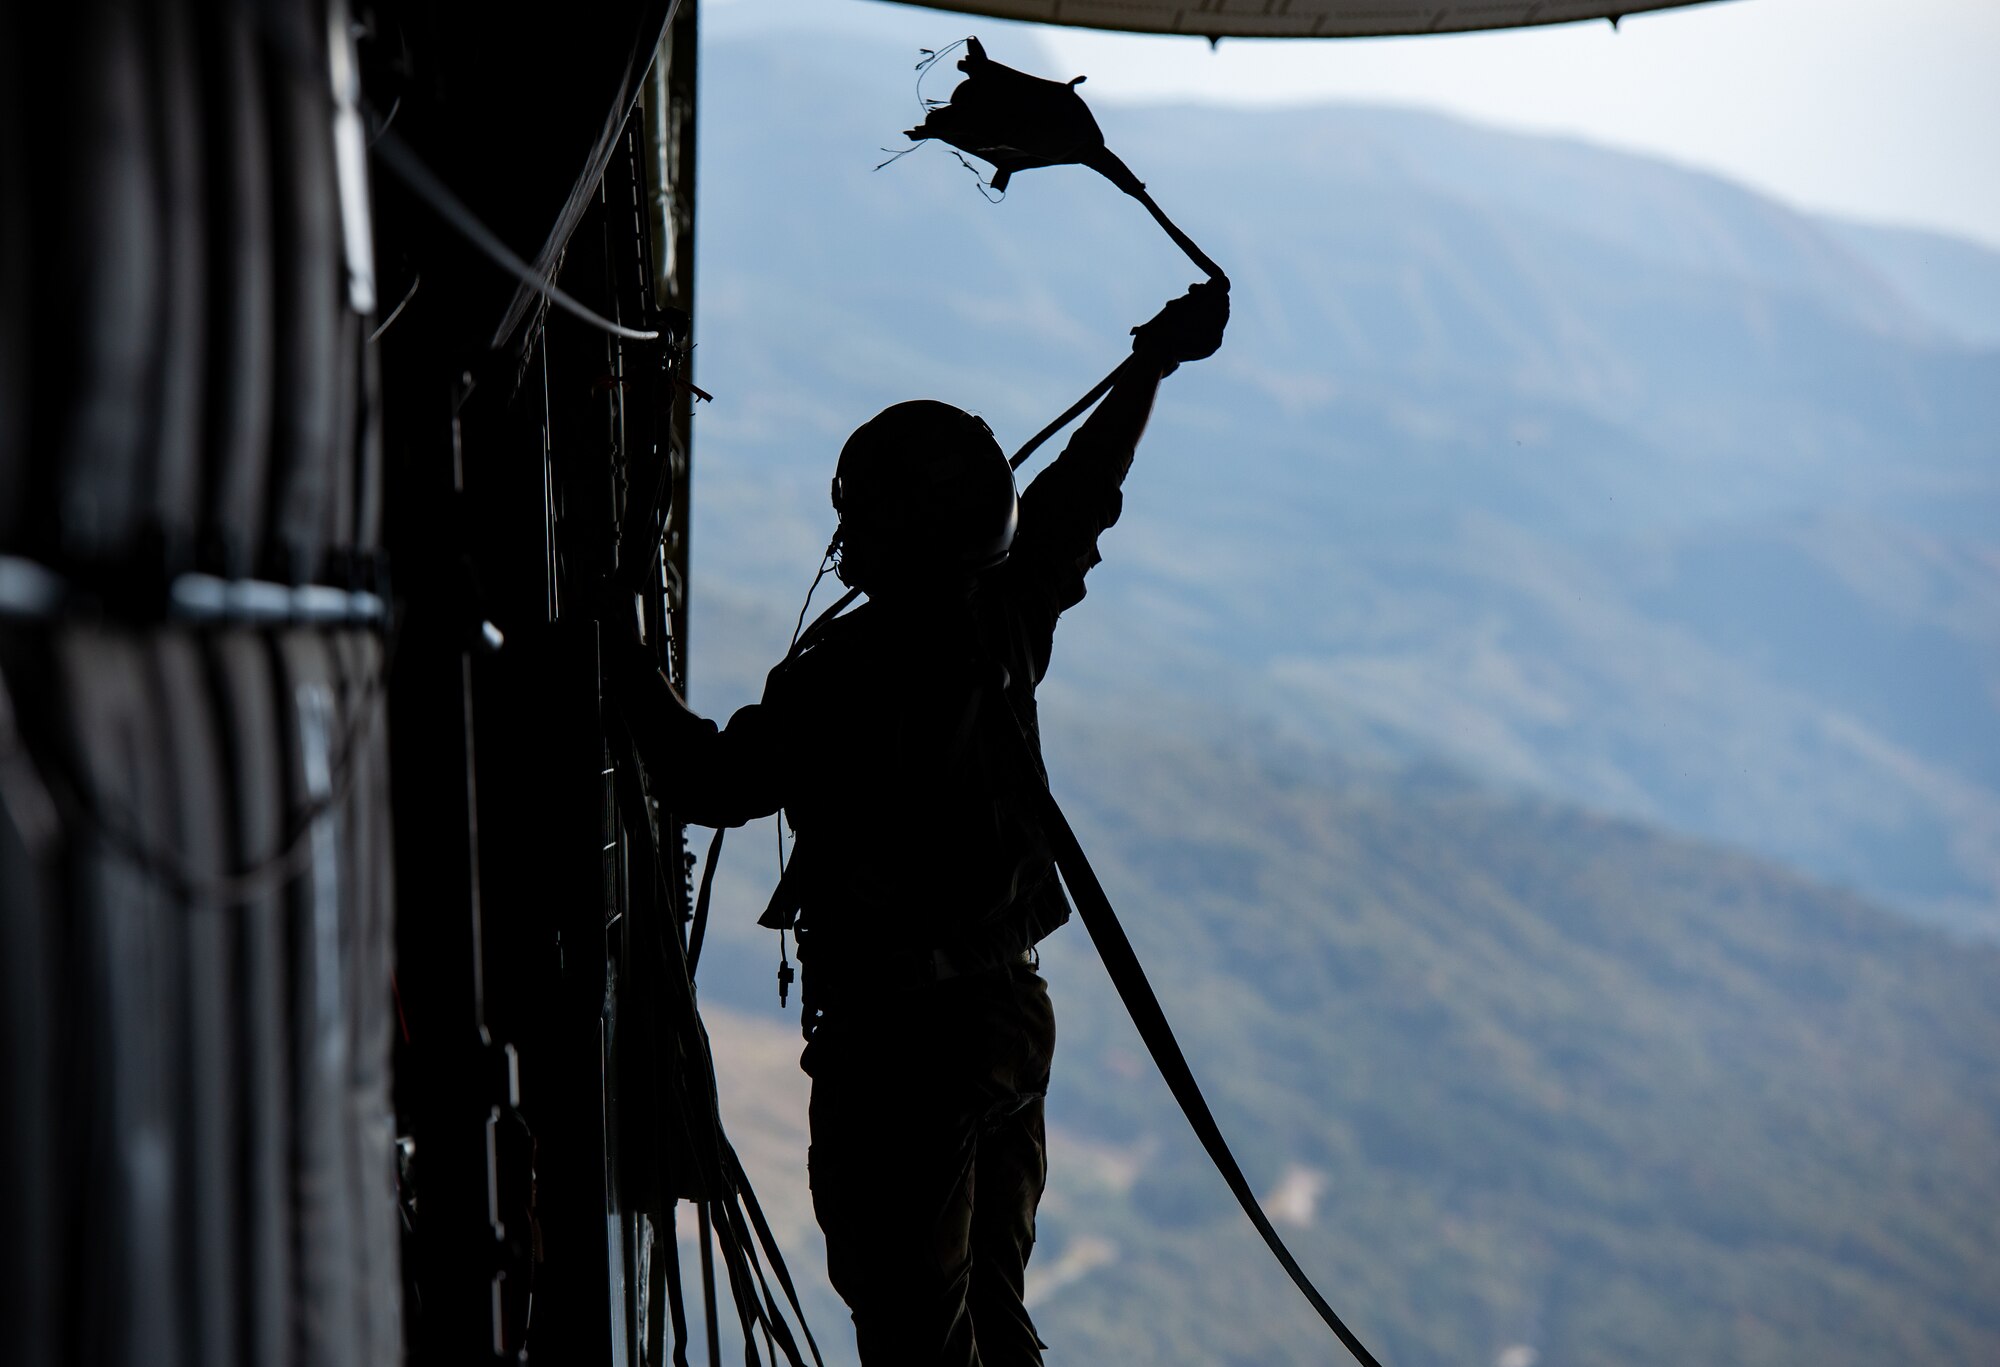 Staff Sgt. Vincenzo Gallegos, 36th Airlift Squadron loadmaster, retrieves a parachute line during a cargo drop during Keen Sword 21